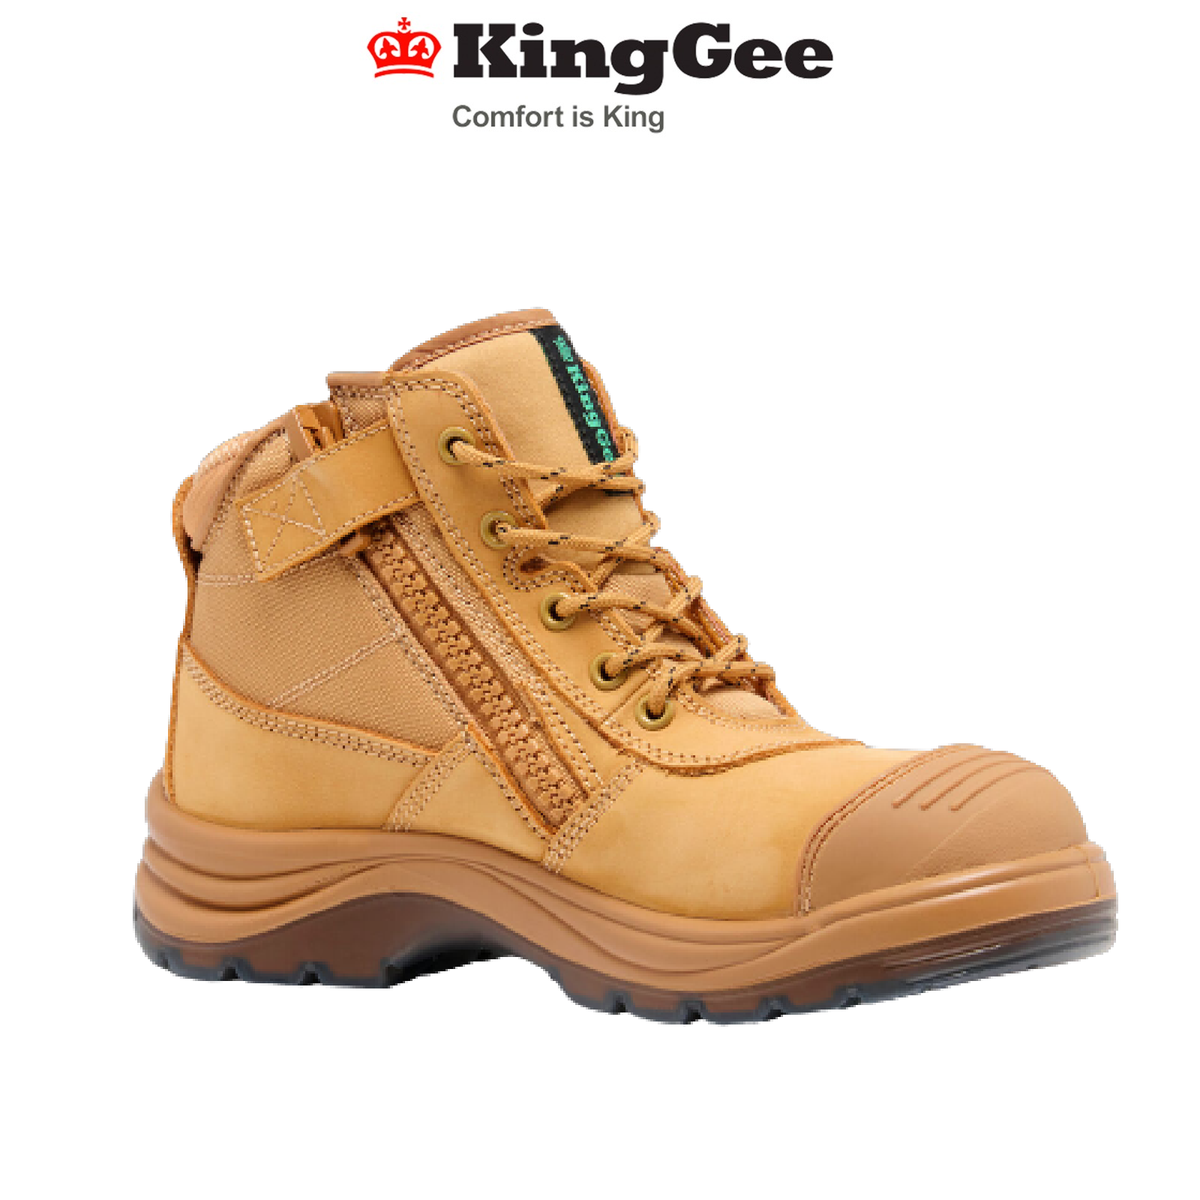 KingGee Womens Tradie Work Boots Work Safety Memory Foam Toe Protect K26491